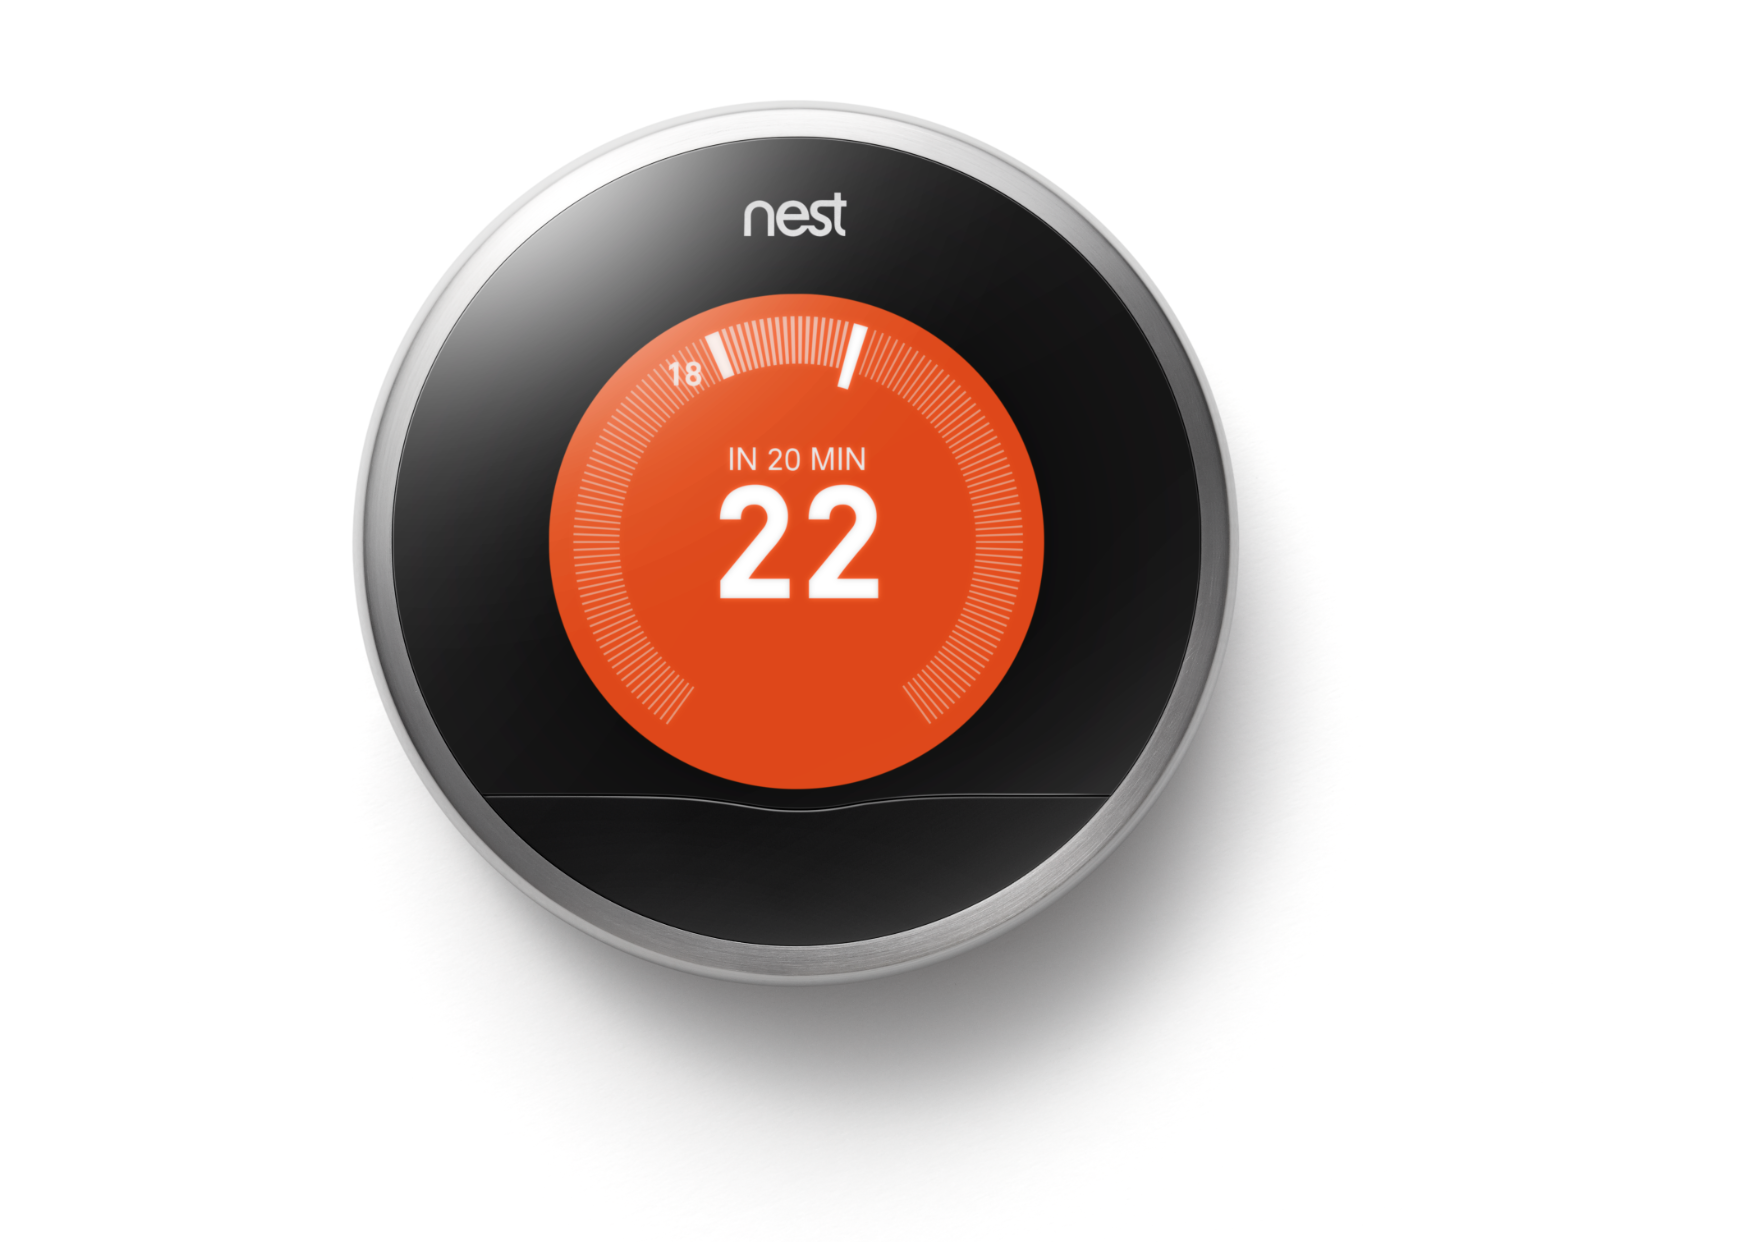 One of the first smart thermostats now arrives in the UK